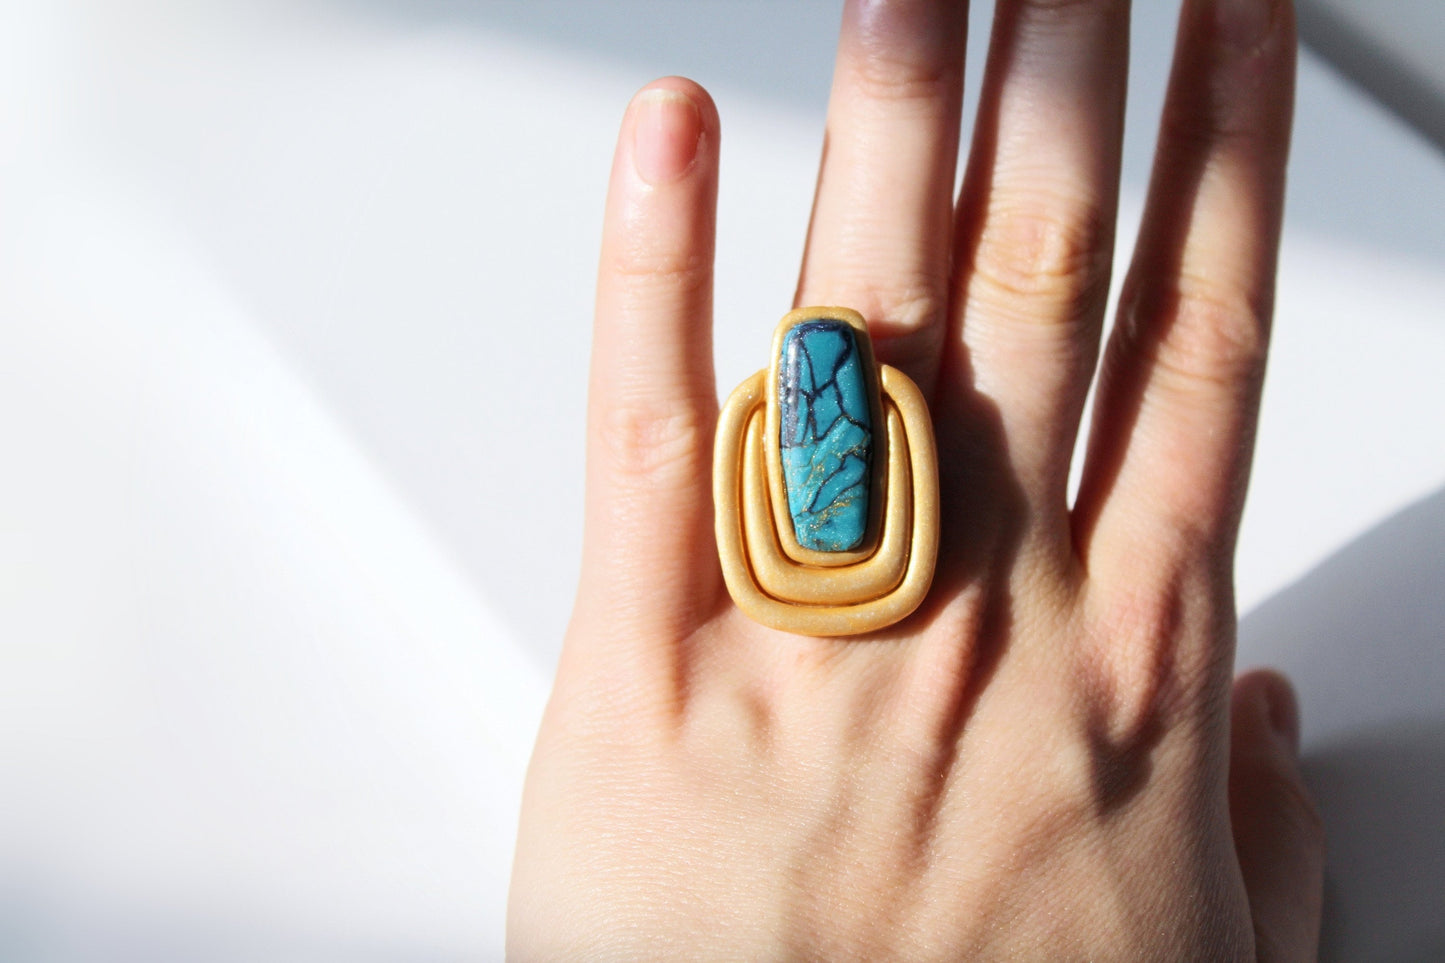 Turquoise Ring, Statement Summer Ring , Handmade Jewelry, Aqua Ring, Marble Clay Jewelry, Elegant, Turquoise Rings, Gift, Polymer Clay Ring